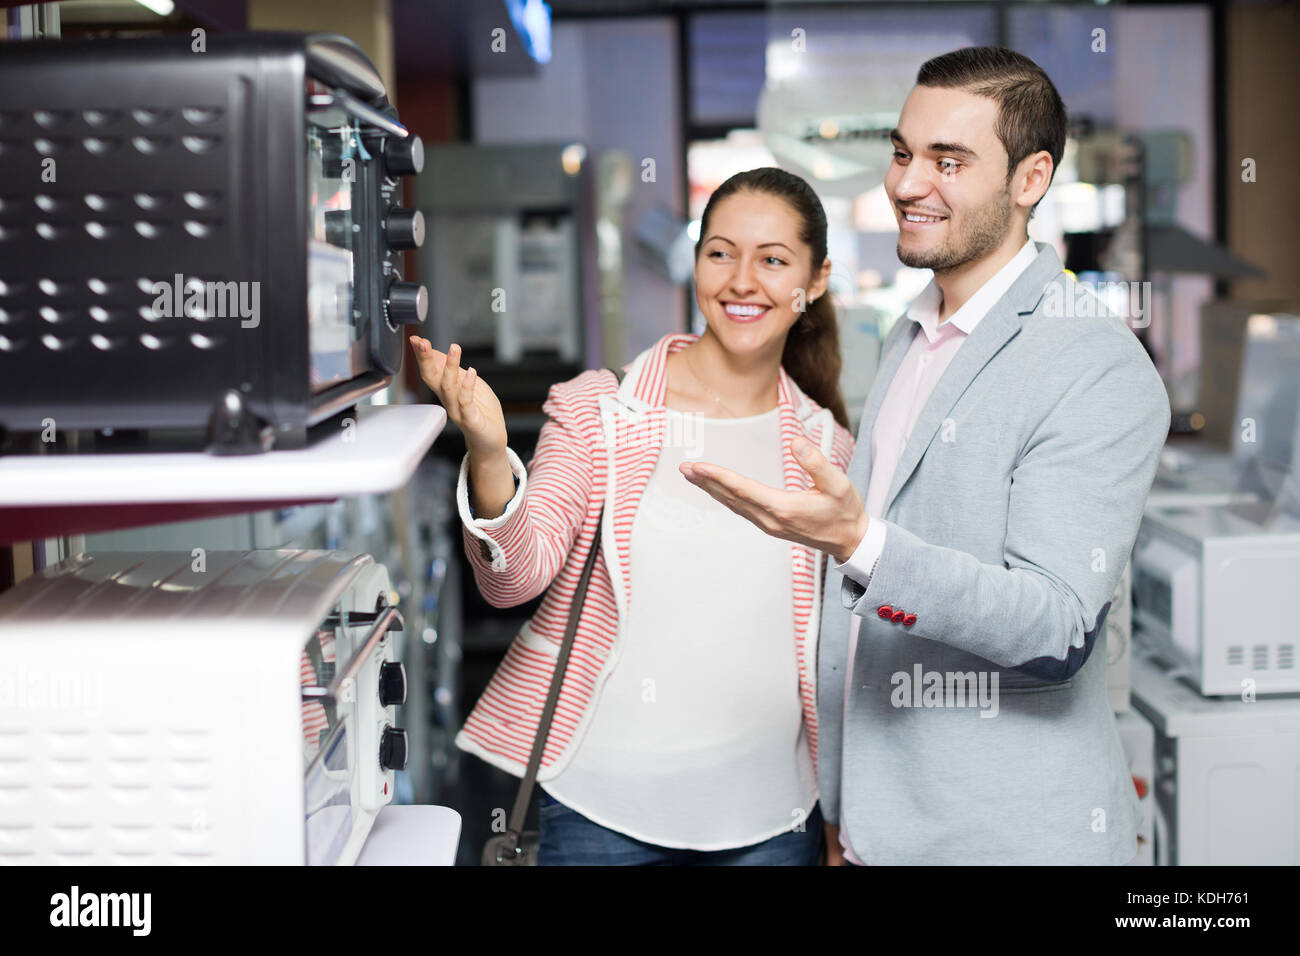 Positive smiling customers choosing new microwave oven in hypermarket . Focus on guy Stock Photo